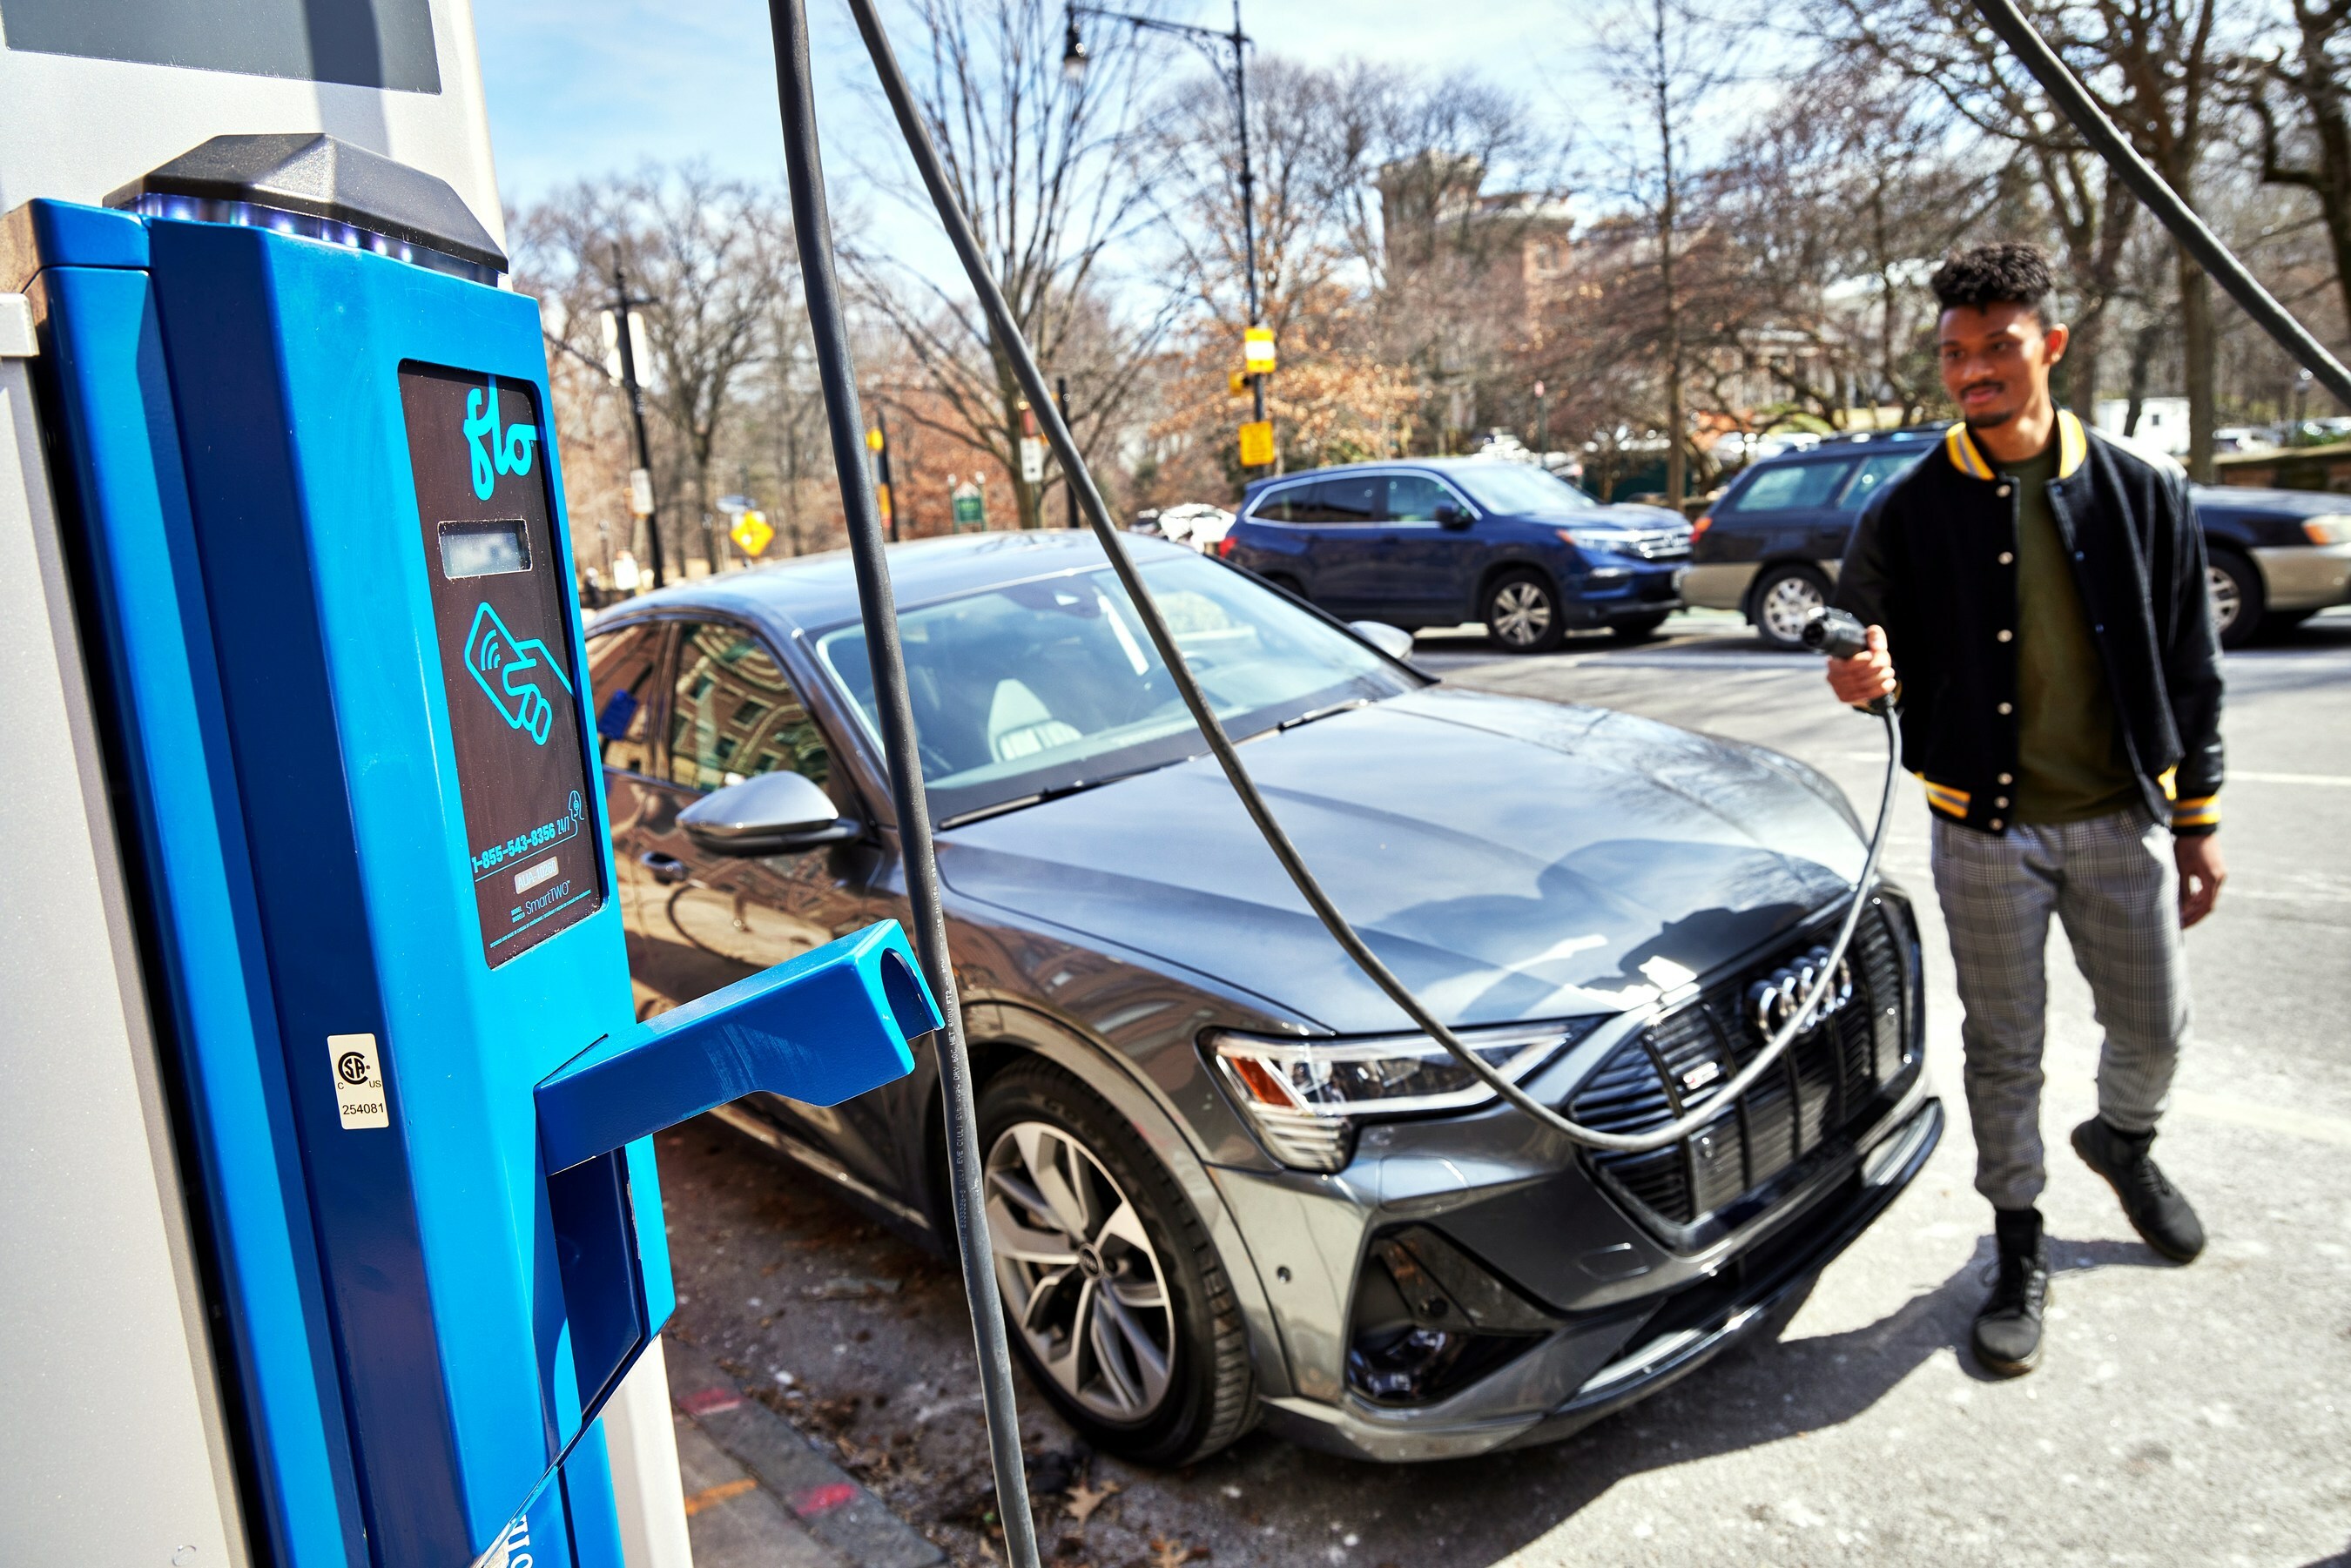 Flo has been named as a founding member of the National Charging Experience Consortium led by the US DOE. Photo: CNW Group/Flo